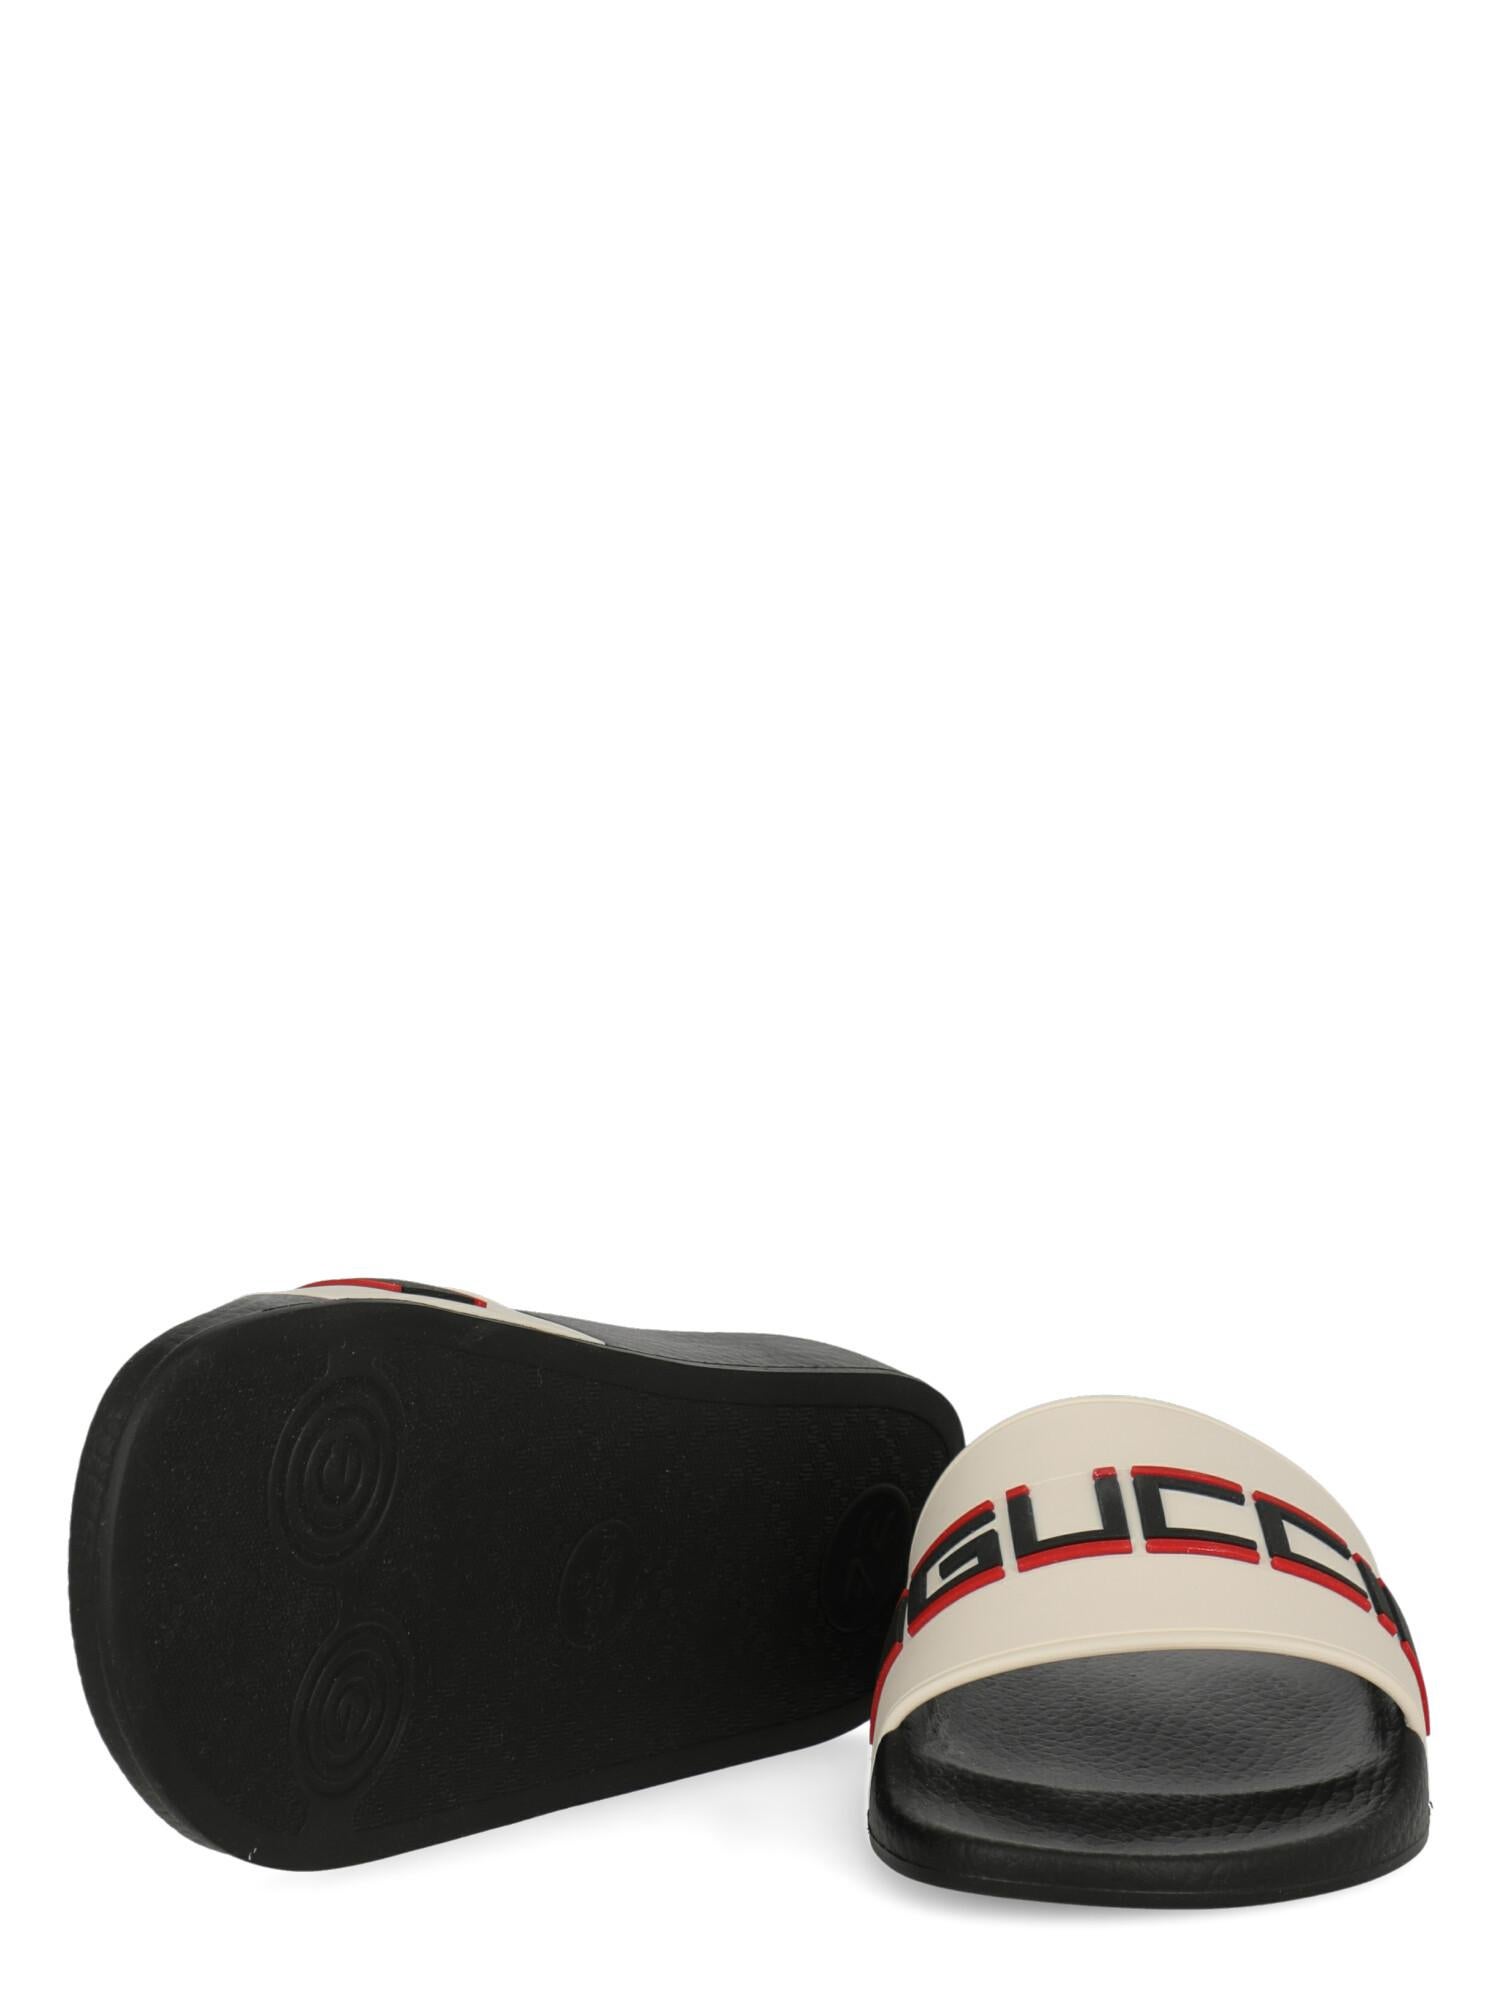 Women's Gucci Women Slippers Black, Red, White Synthetic Fibers EU 39 For Sale